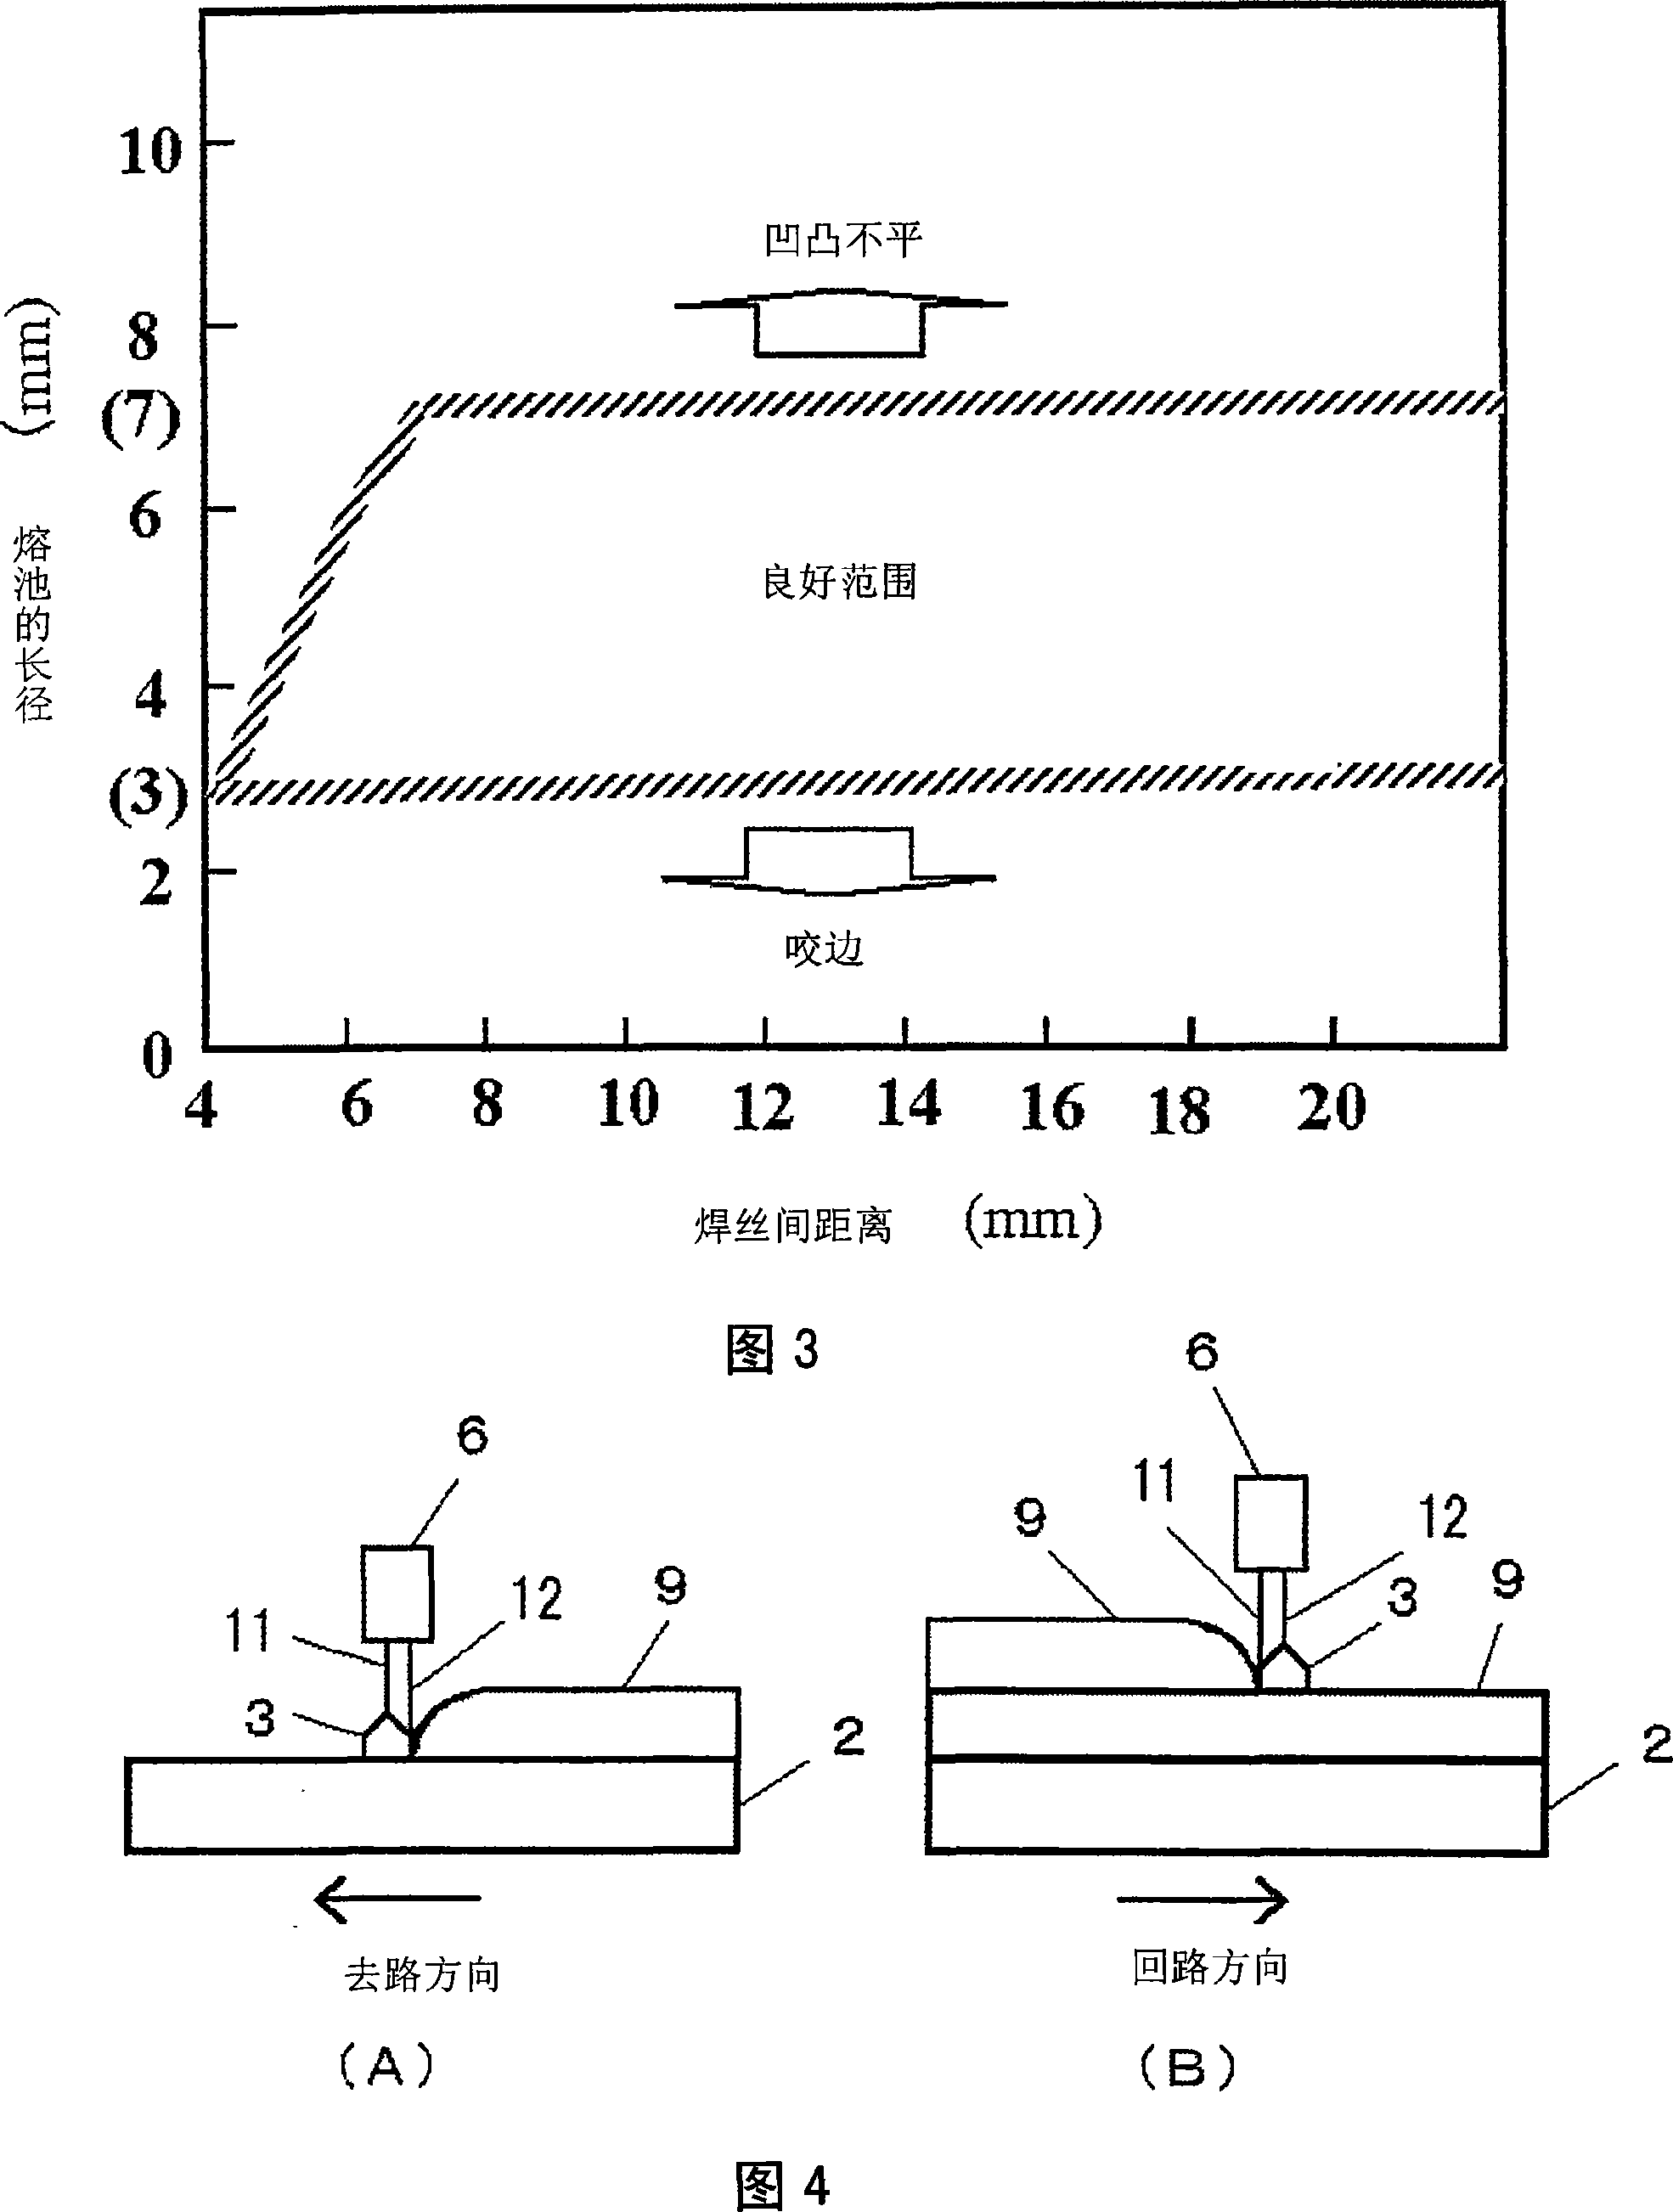 Double-wire feeding arc welding method and multi-layer surfacing method